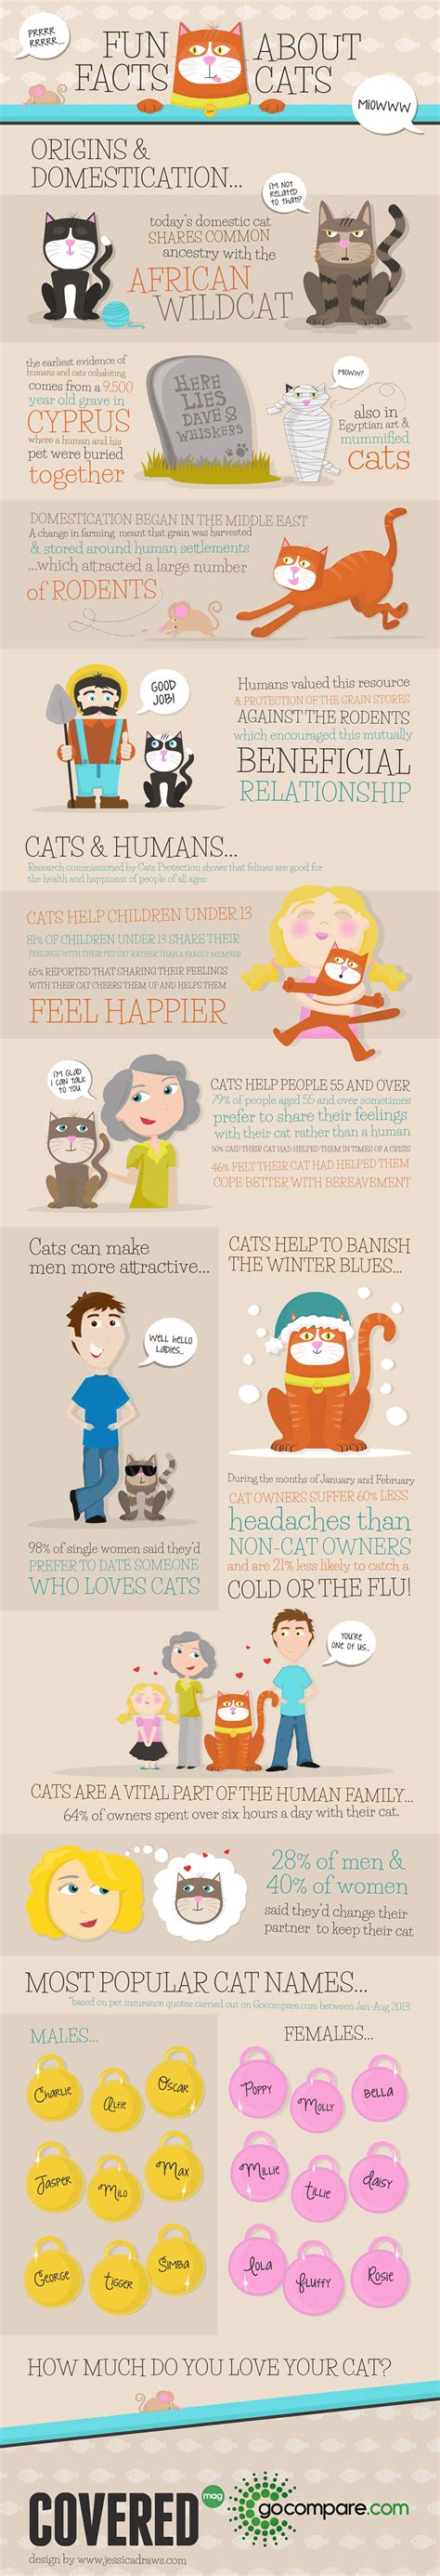 Fun Facts About Cats Infographic